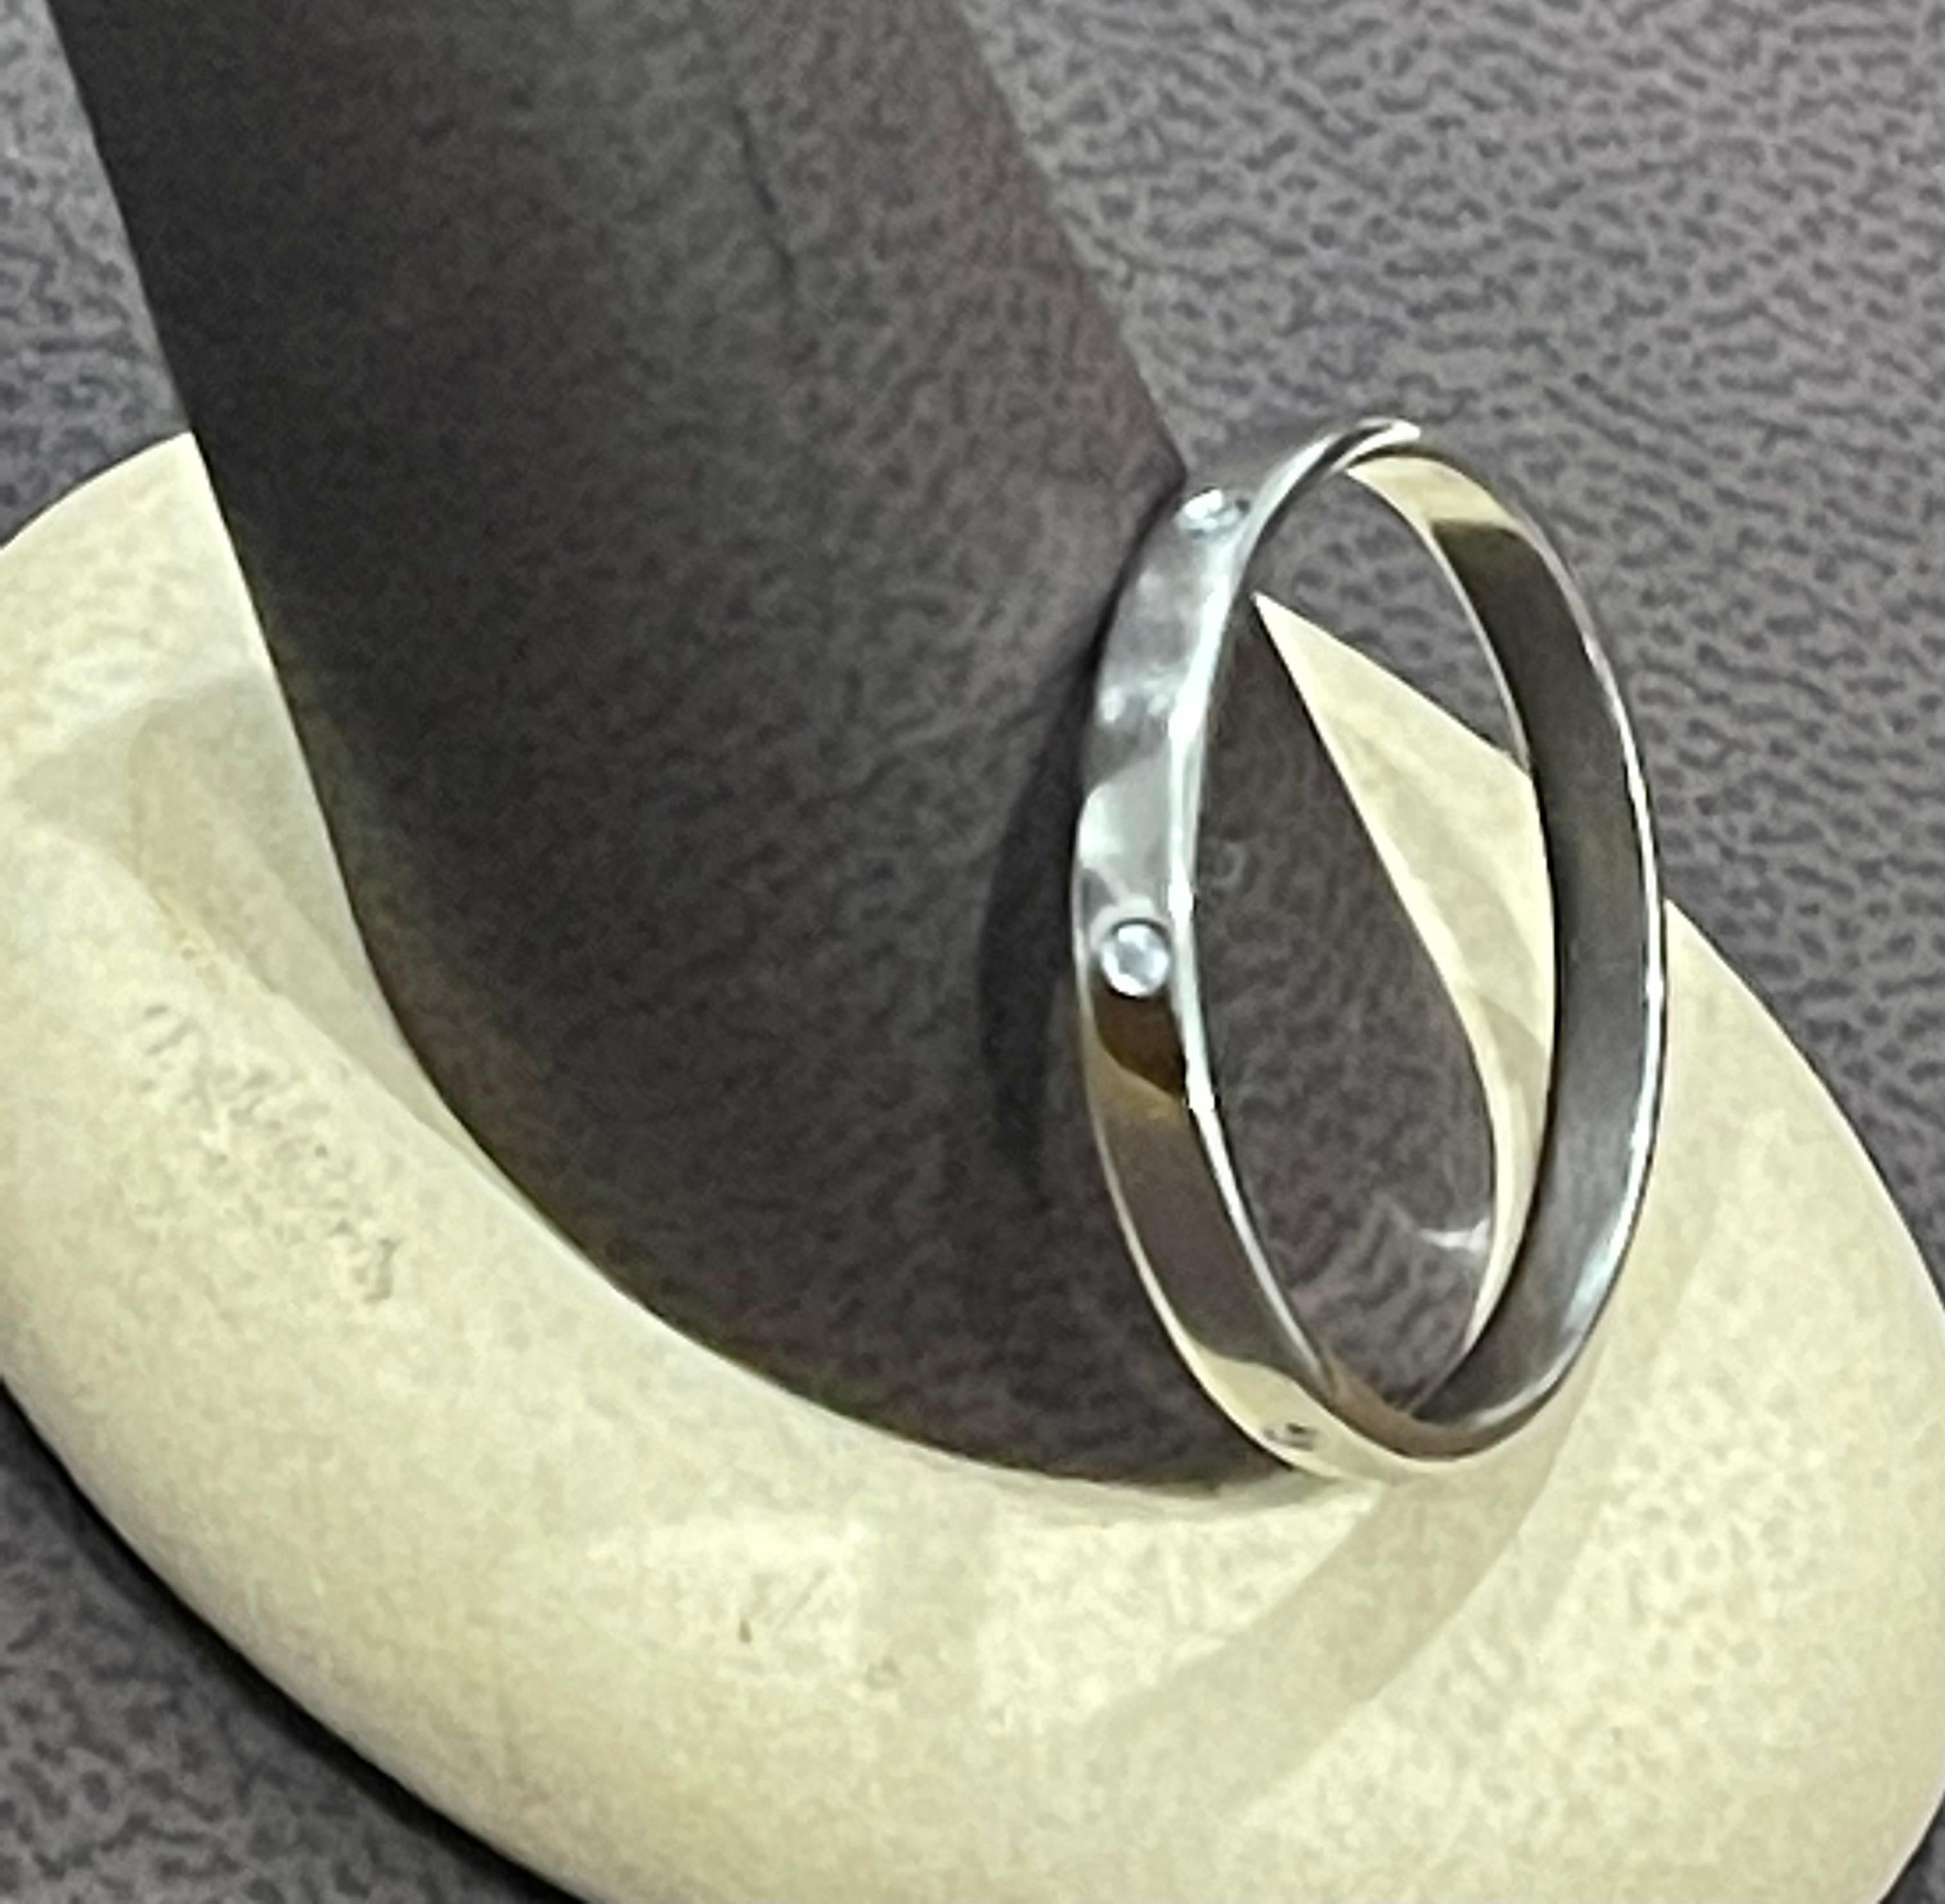 6 Flush Set Bezel Diamond Eternity Wedding Band in 14 Karat White Gold Size 11.5 
Very clean and shiny diamonds.
This eternity band features Gypsy set or burnished, the bright white diamonds , 14k gold band ring shines brightly and is a perennial